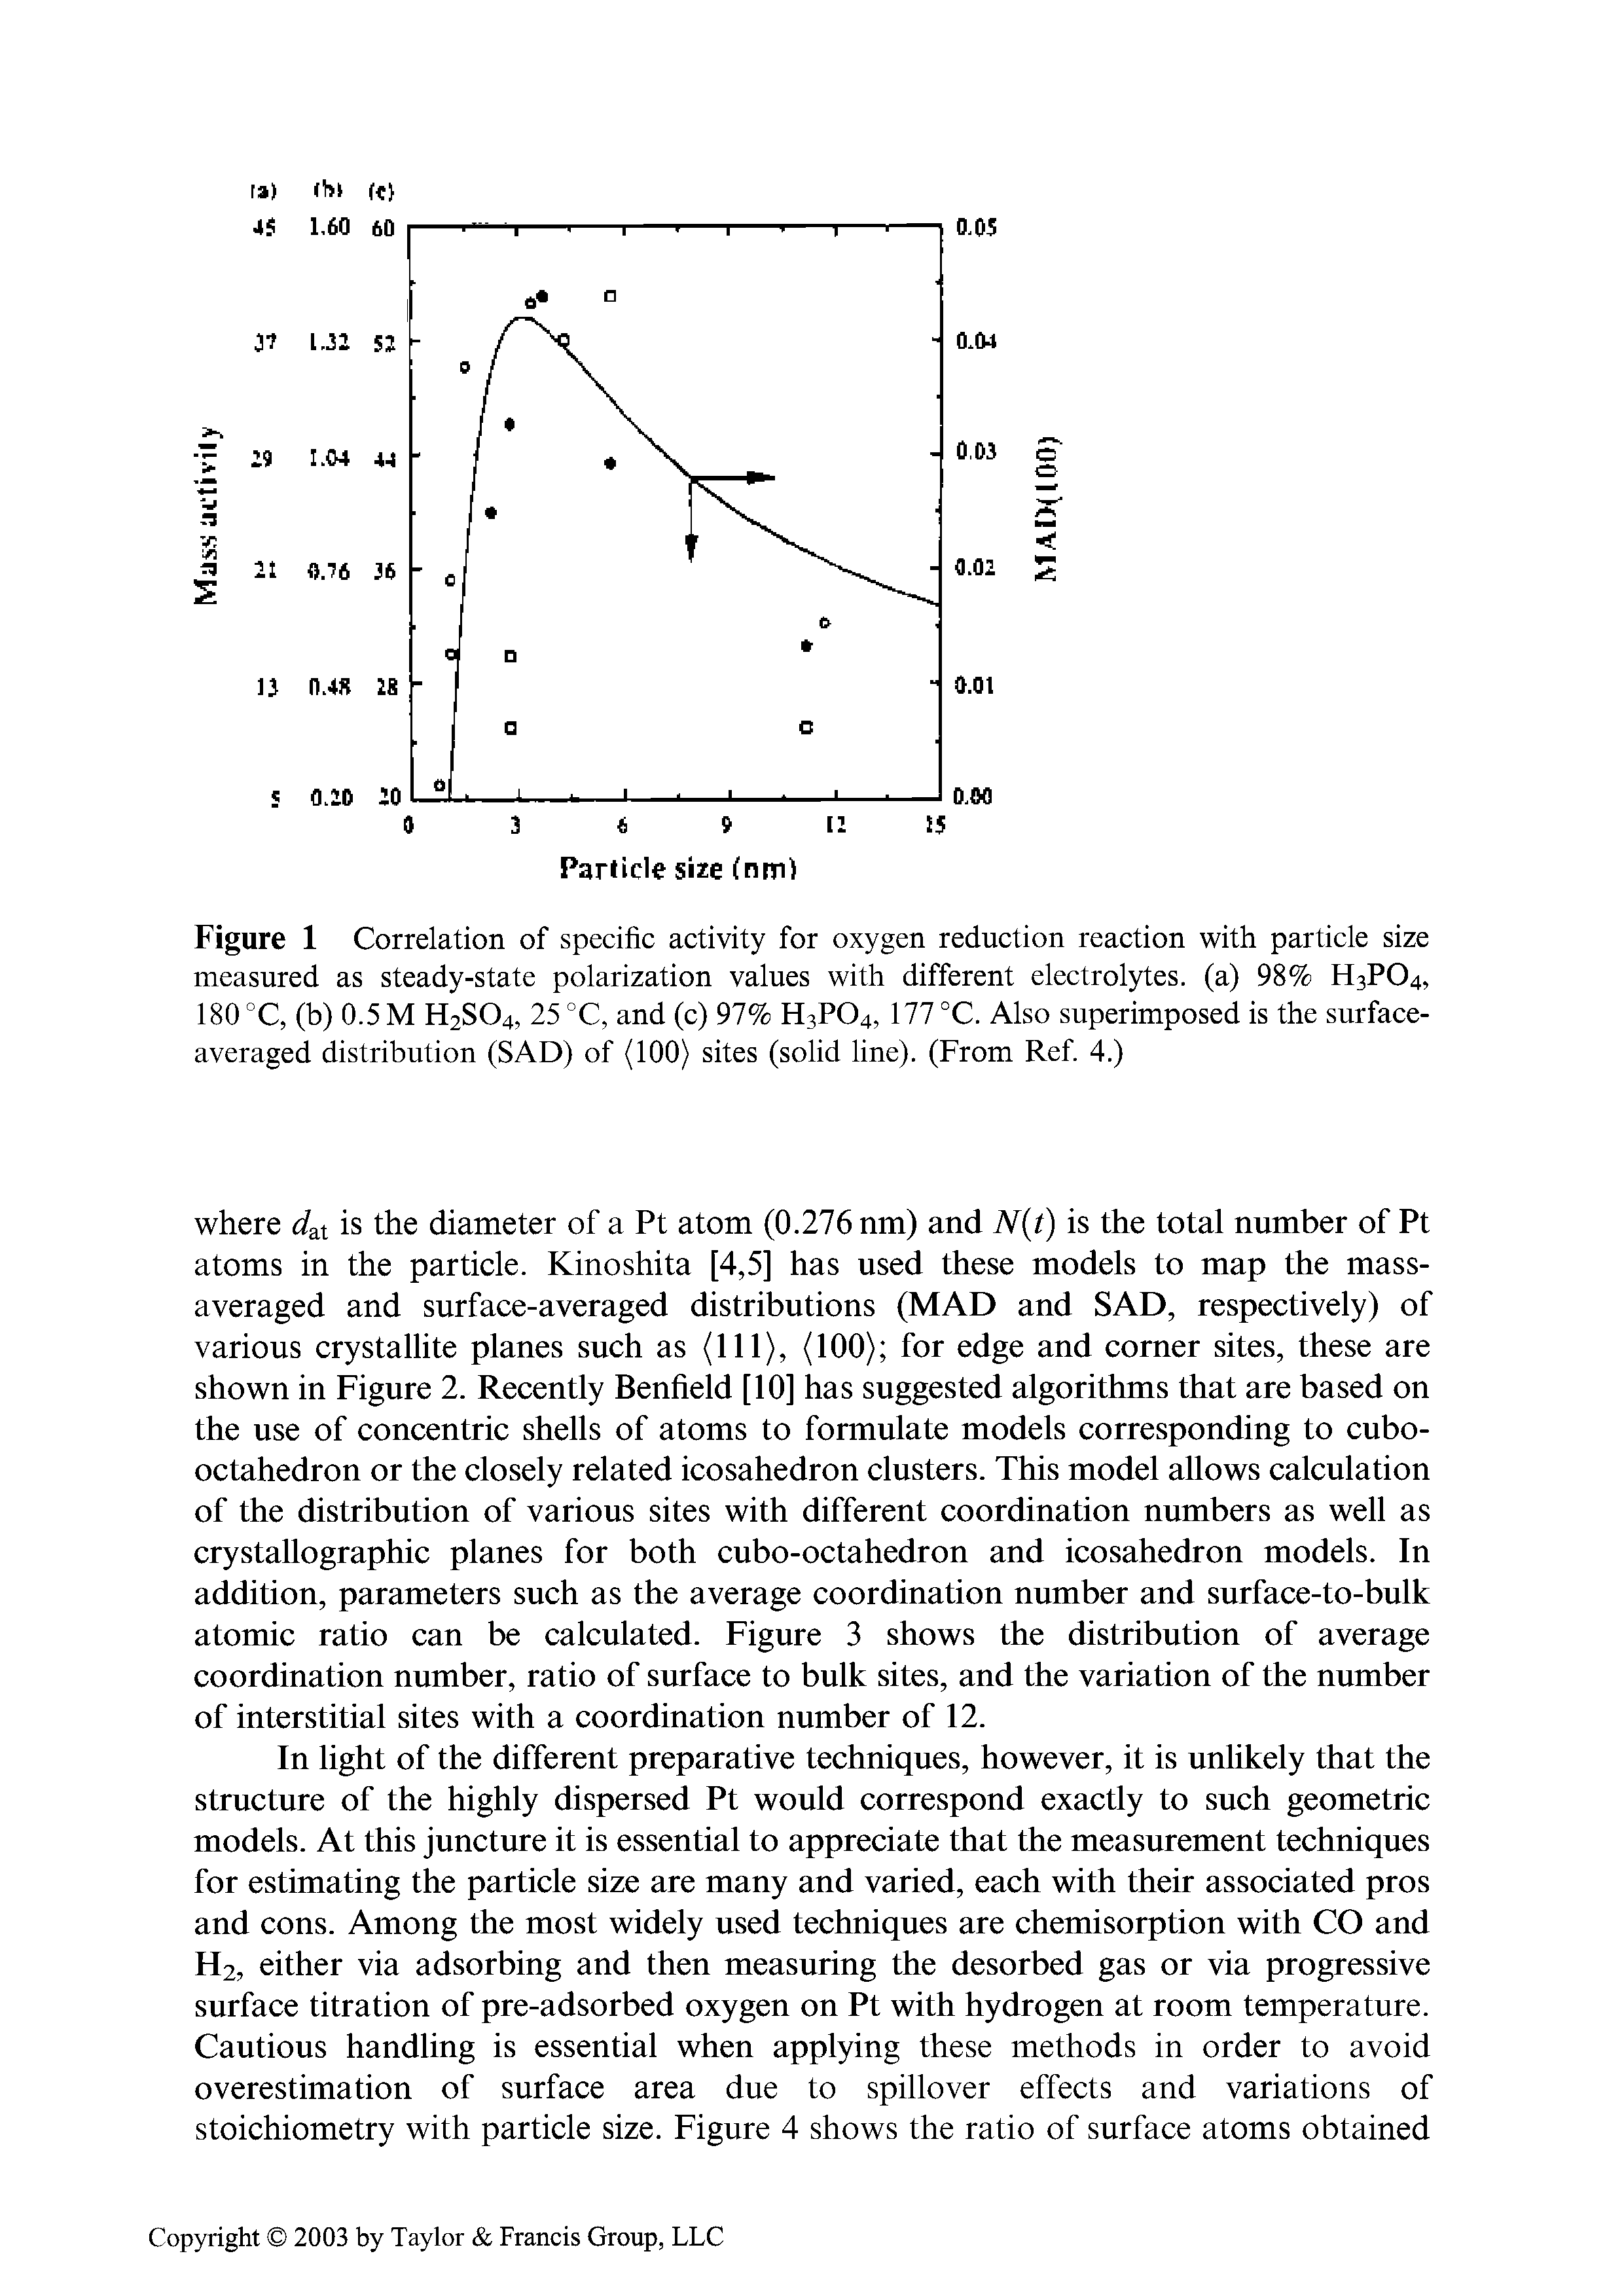 Figure 1 Correlation of specific activity for oxygen reduction reaction with particle size measured as steady-state polarization values with different electrolytes, (a) 98% H3PO4, 180 °C, (b) 0.5 M H2SO4, 25 °C, and (c) 97% H3PO4, 177 °C. Also superimposed is the surface-averaged distribution (SAD) of (100) sites (solid line). (From Ref. 4.)...